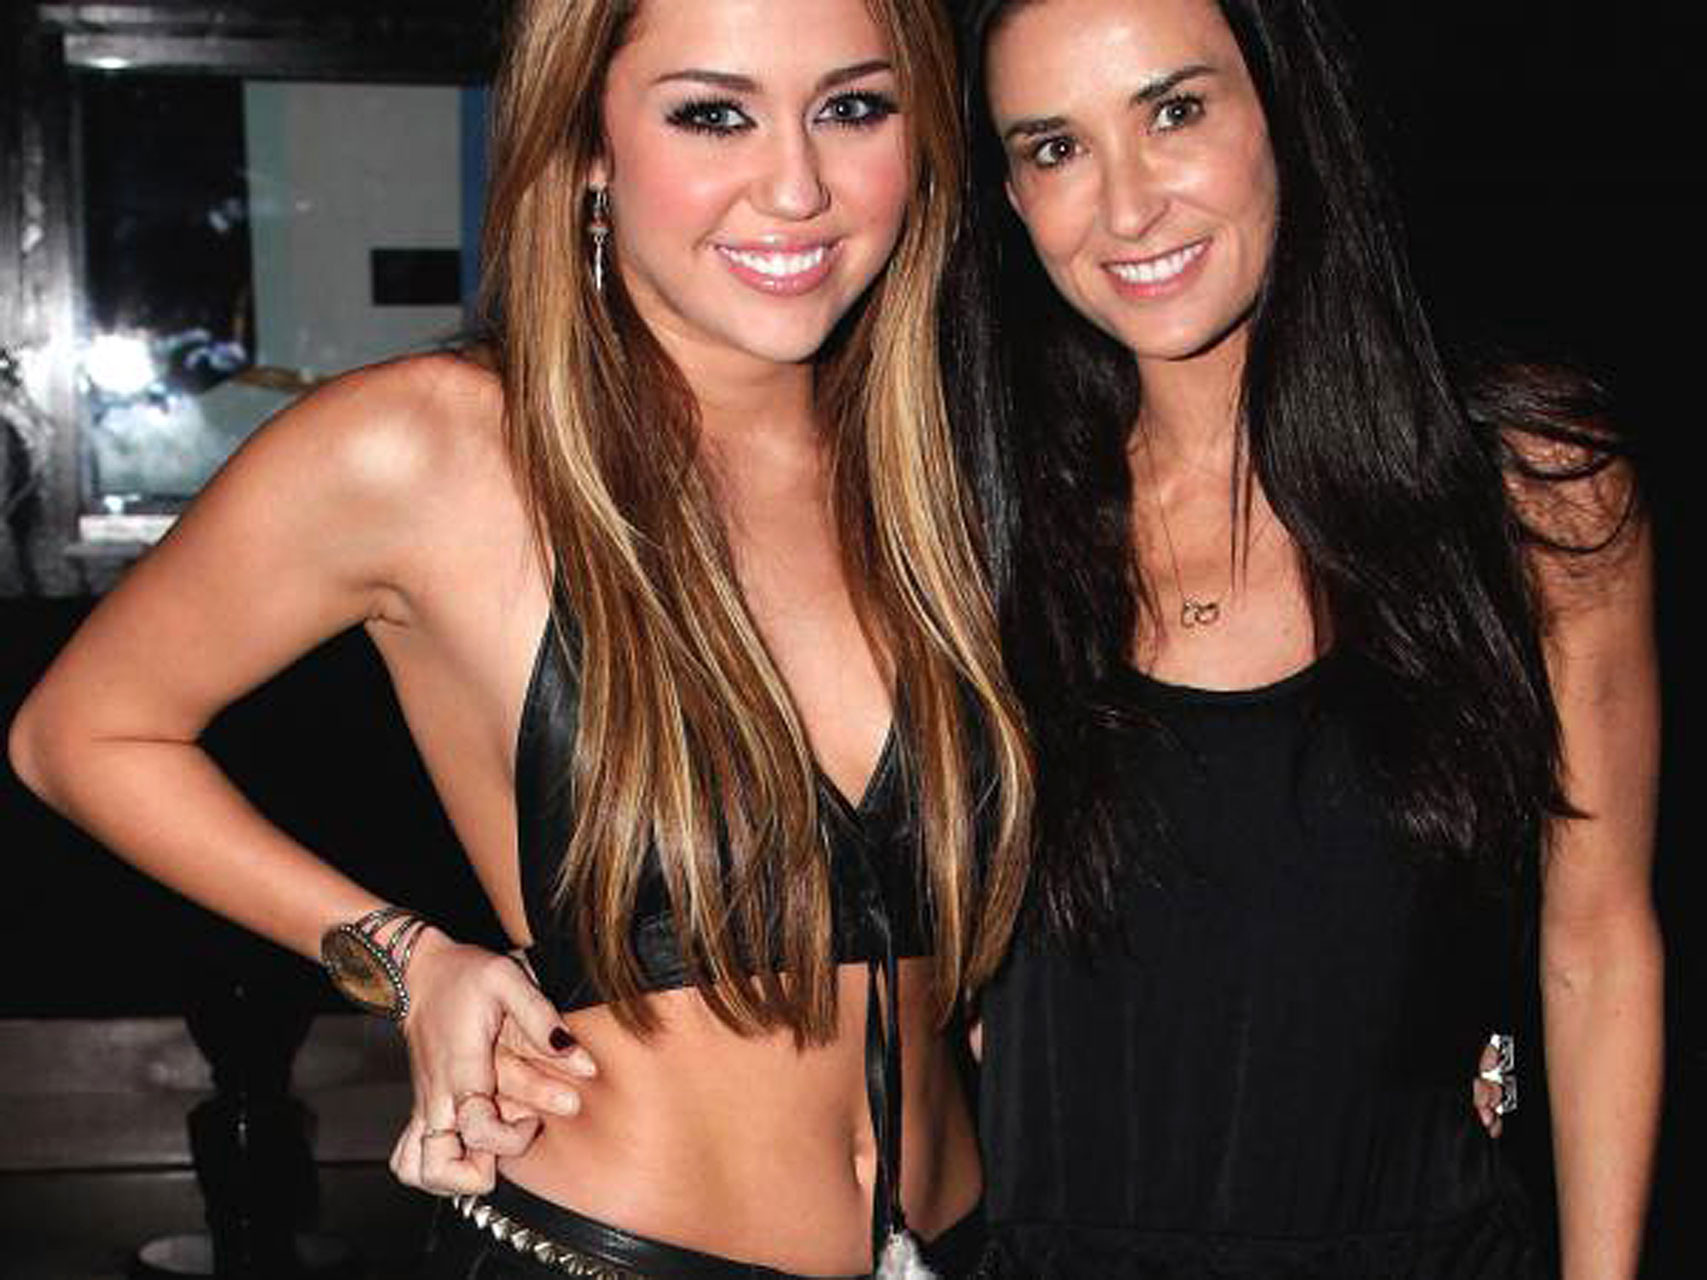 Miley Cyrus young and cute singer celebrated her eighteenth birthday #75325453